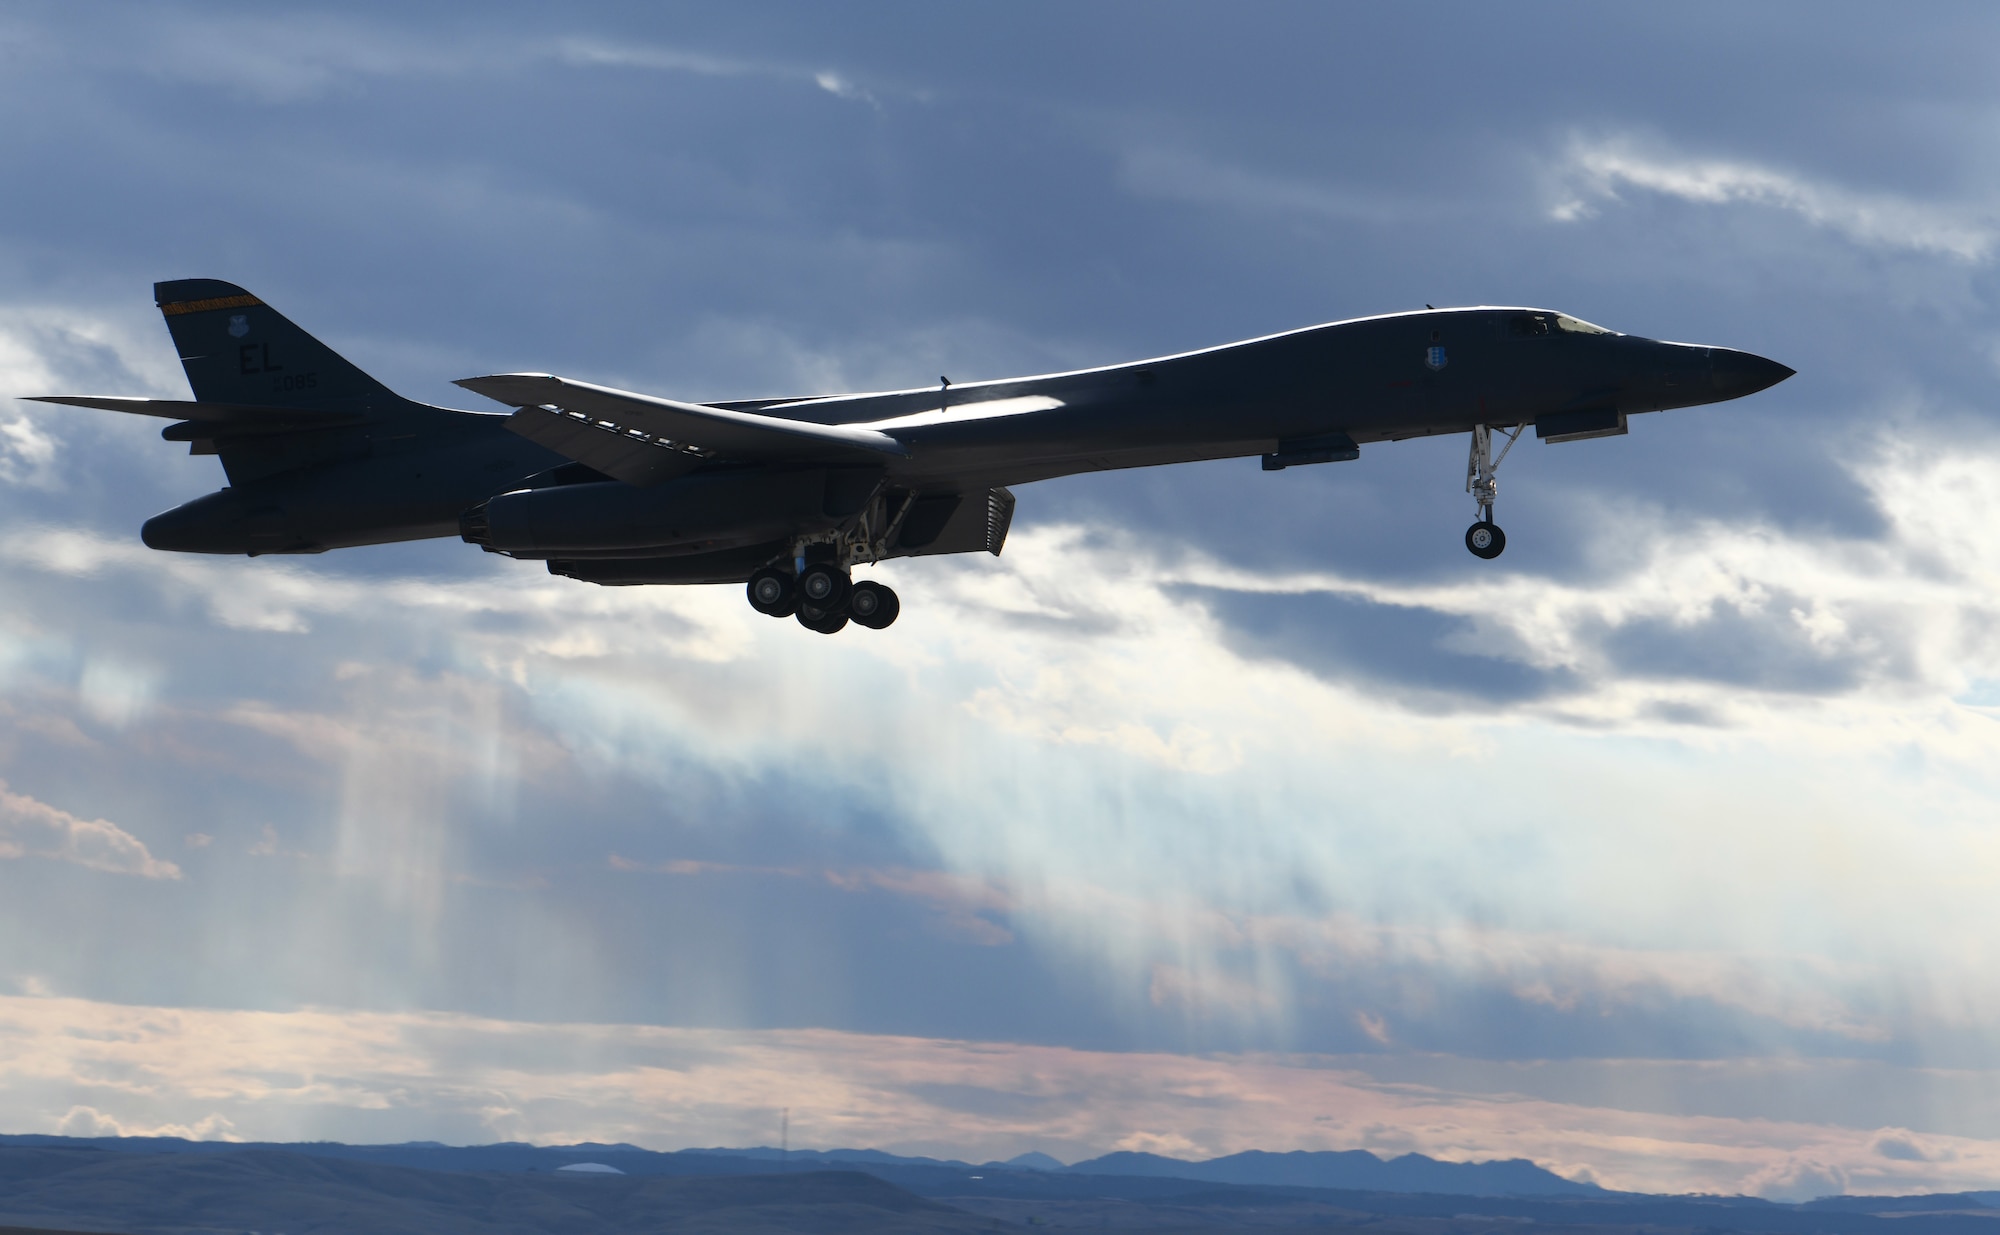 A B-1B Lancer lands at Ellsworth Air Force Base, S.D., Oct. 30, 2018. The B-1 is the backbone of the U.S. Air Force bomber force and carries the largest conventional payload of weapons in the the service's inventory. B-1s assigned to Ellsworth AFB provide support to allies across the globe.(U.S. Air Force photo by Airman 1st Class Thomas Karol)